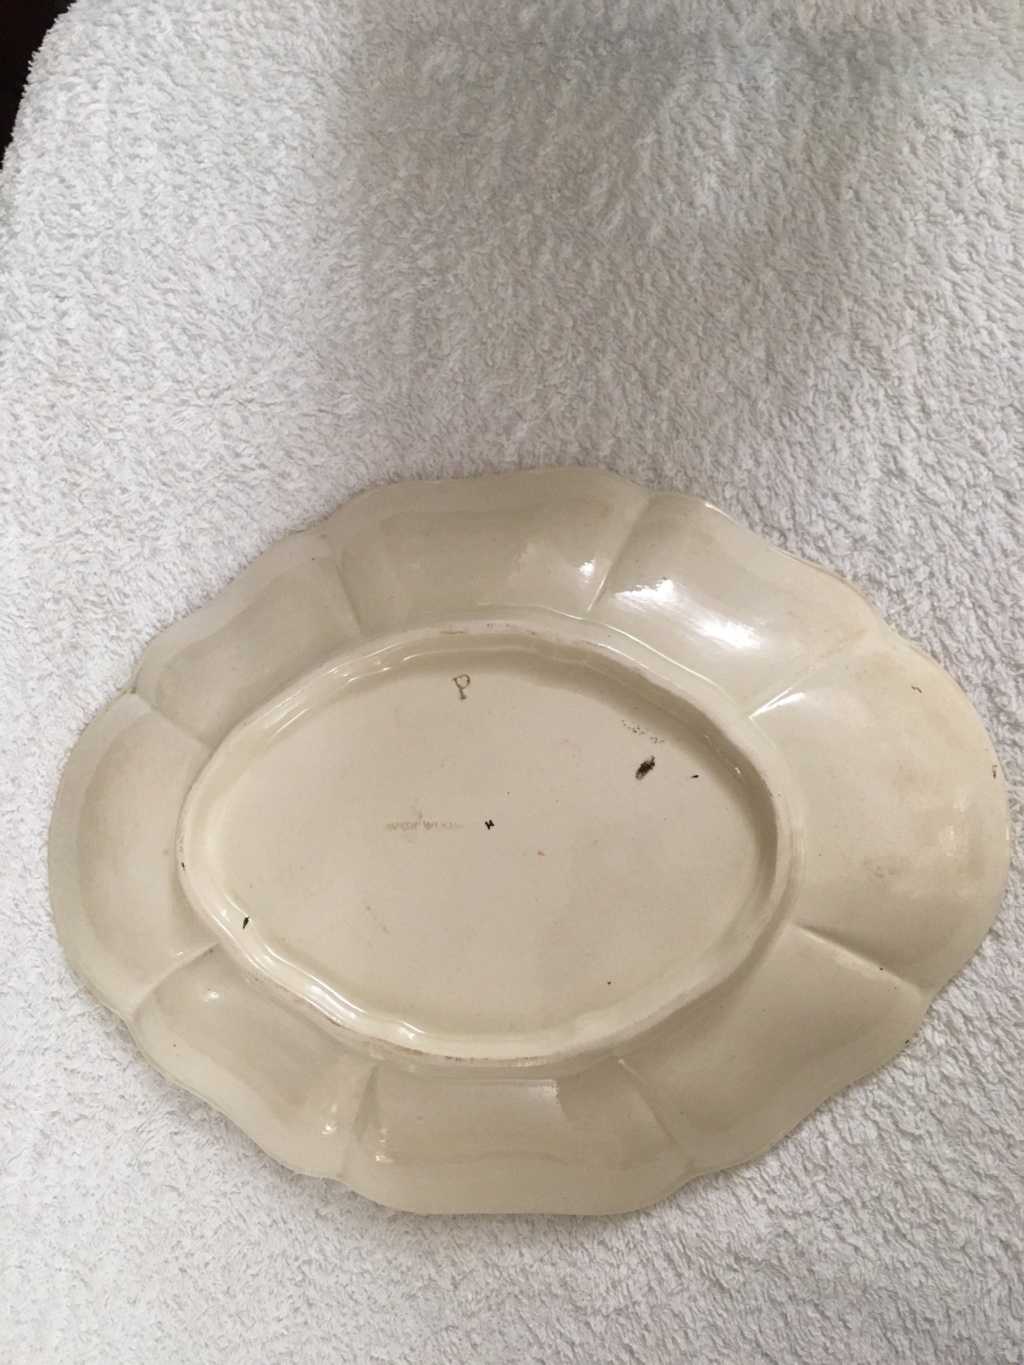 Help dating an early piece of Wedgwood? E1ea2b10